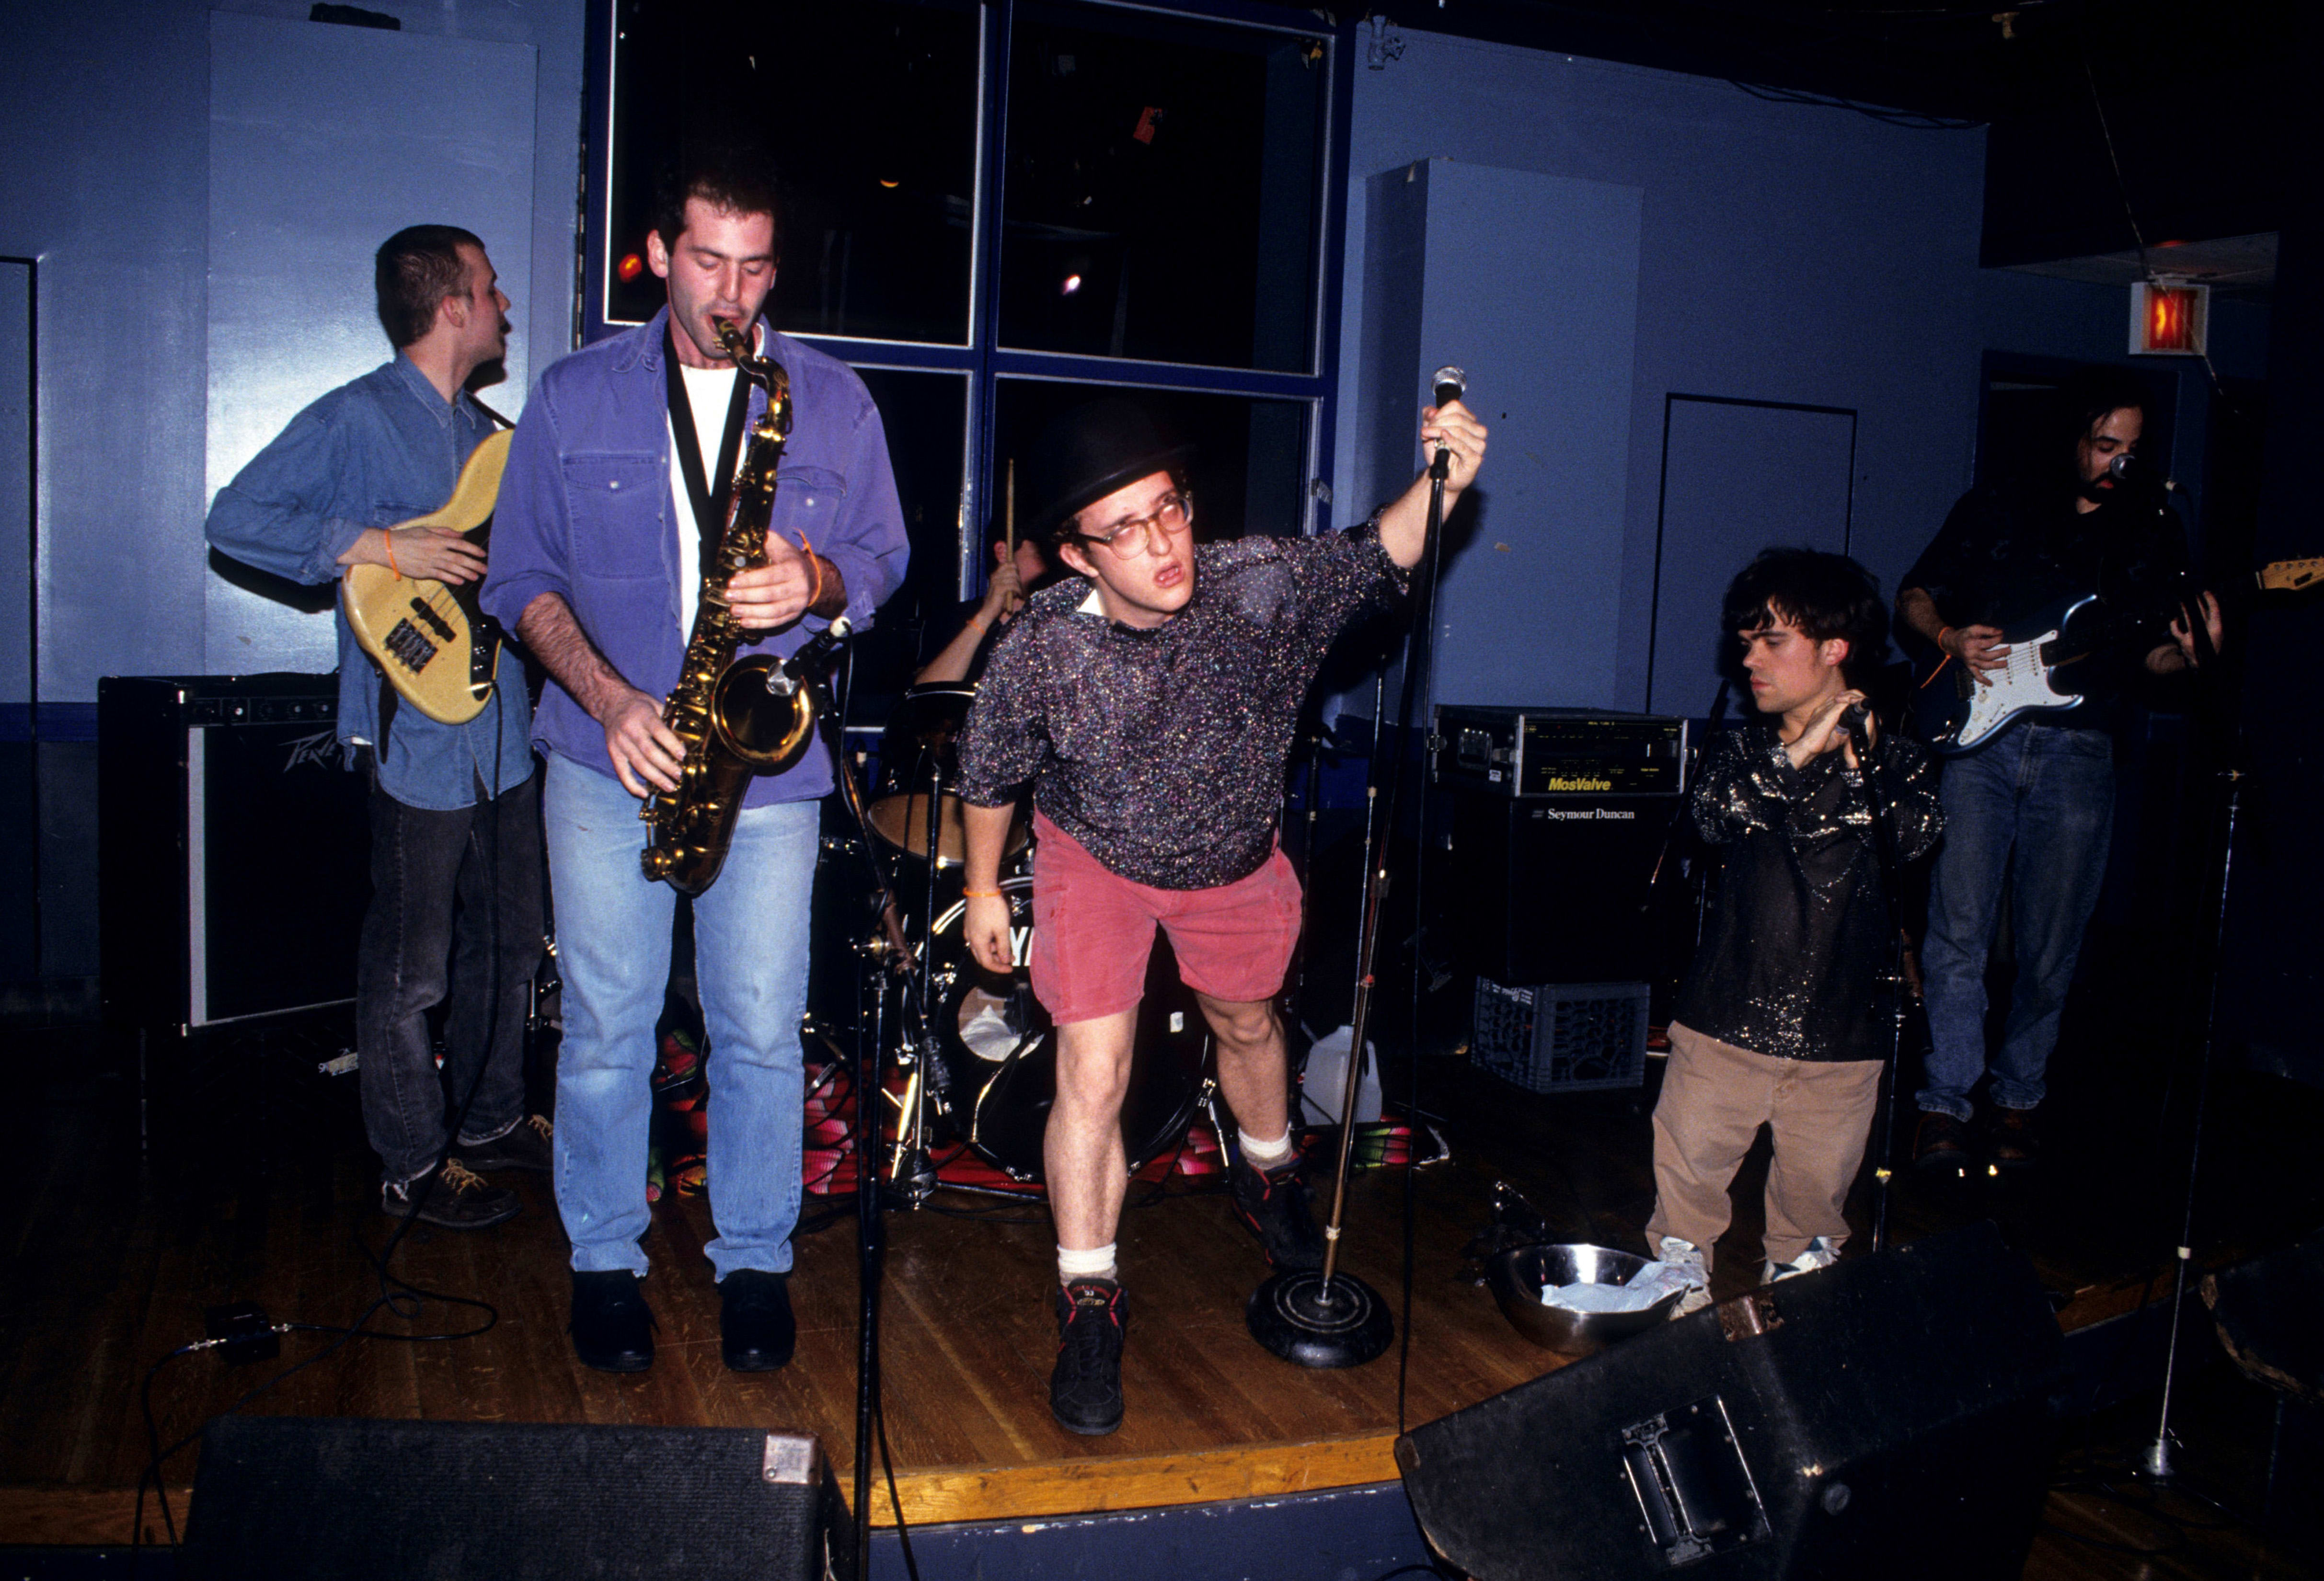 Peter Dinklage performs live with Whizzy at Columbia University on November 13, 1993